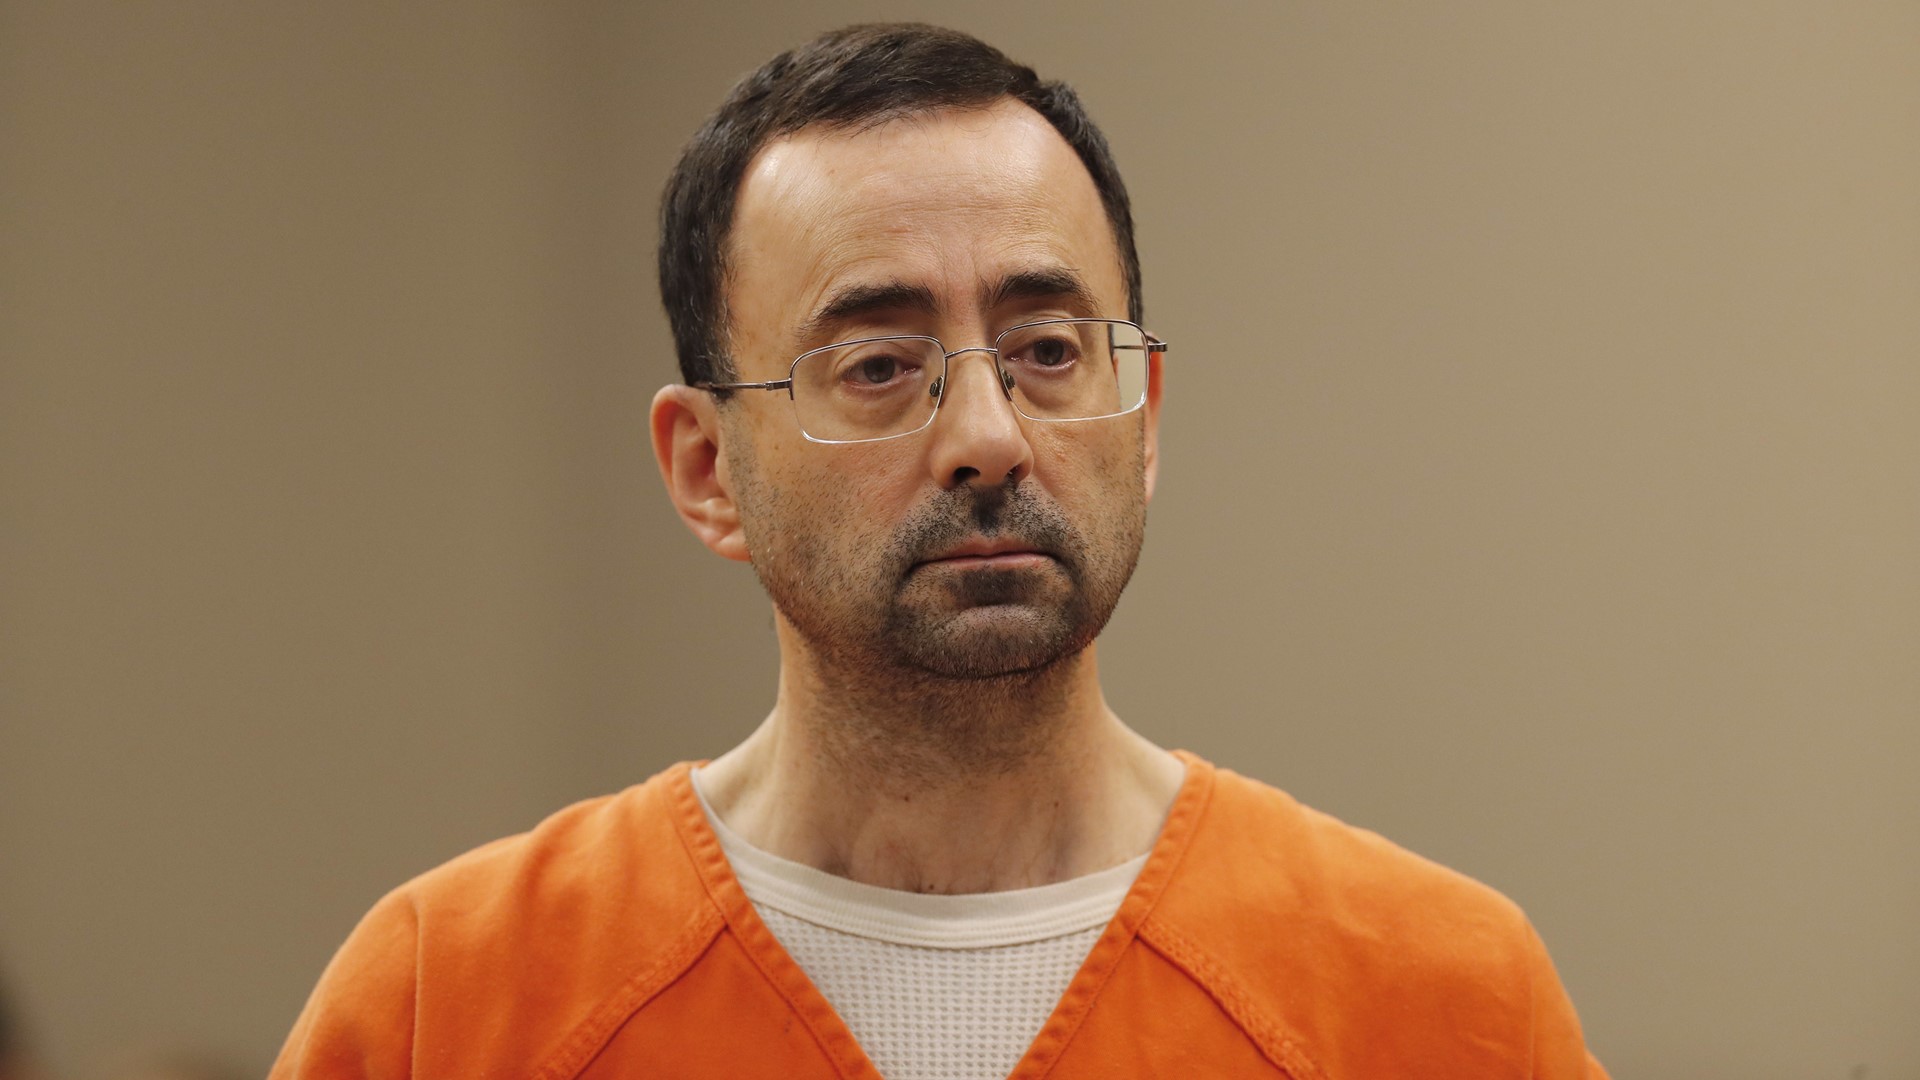 Former USA Gymnastics Larry Nassar plans to ask the Michigan Supreme Court to be sentenced by another judge.